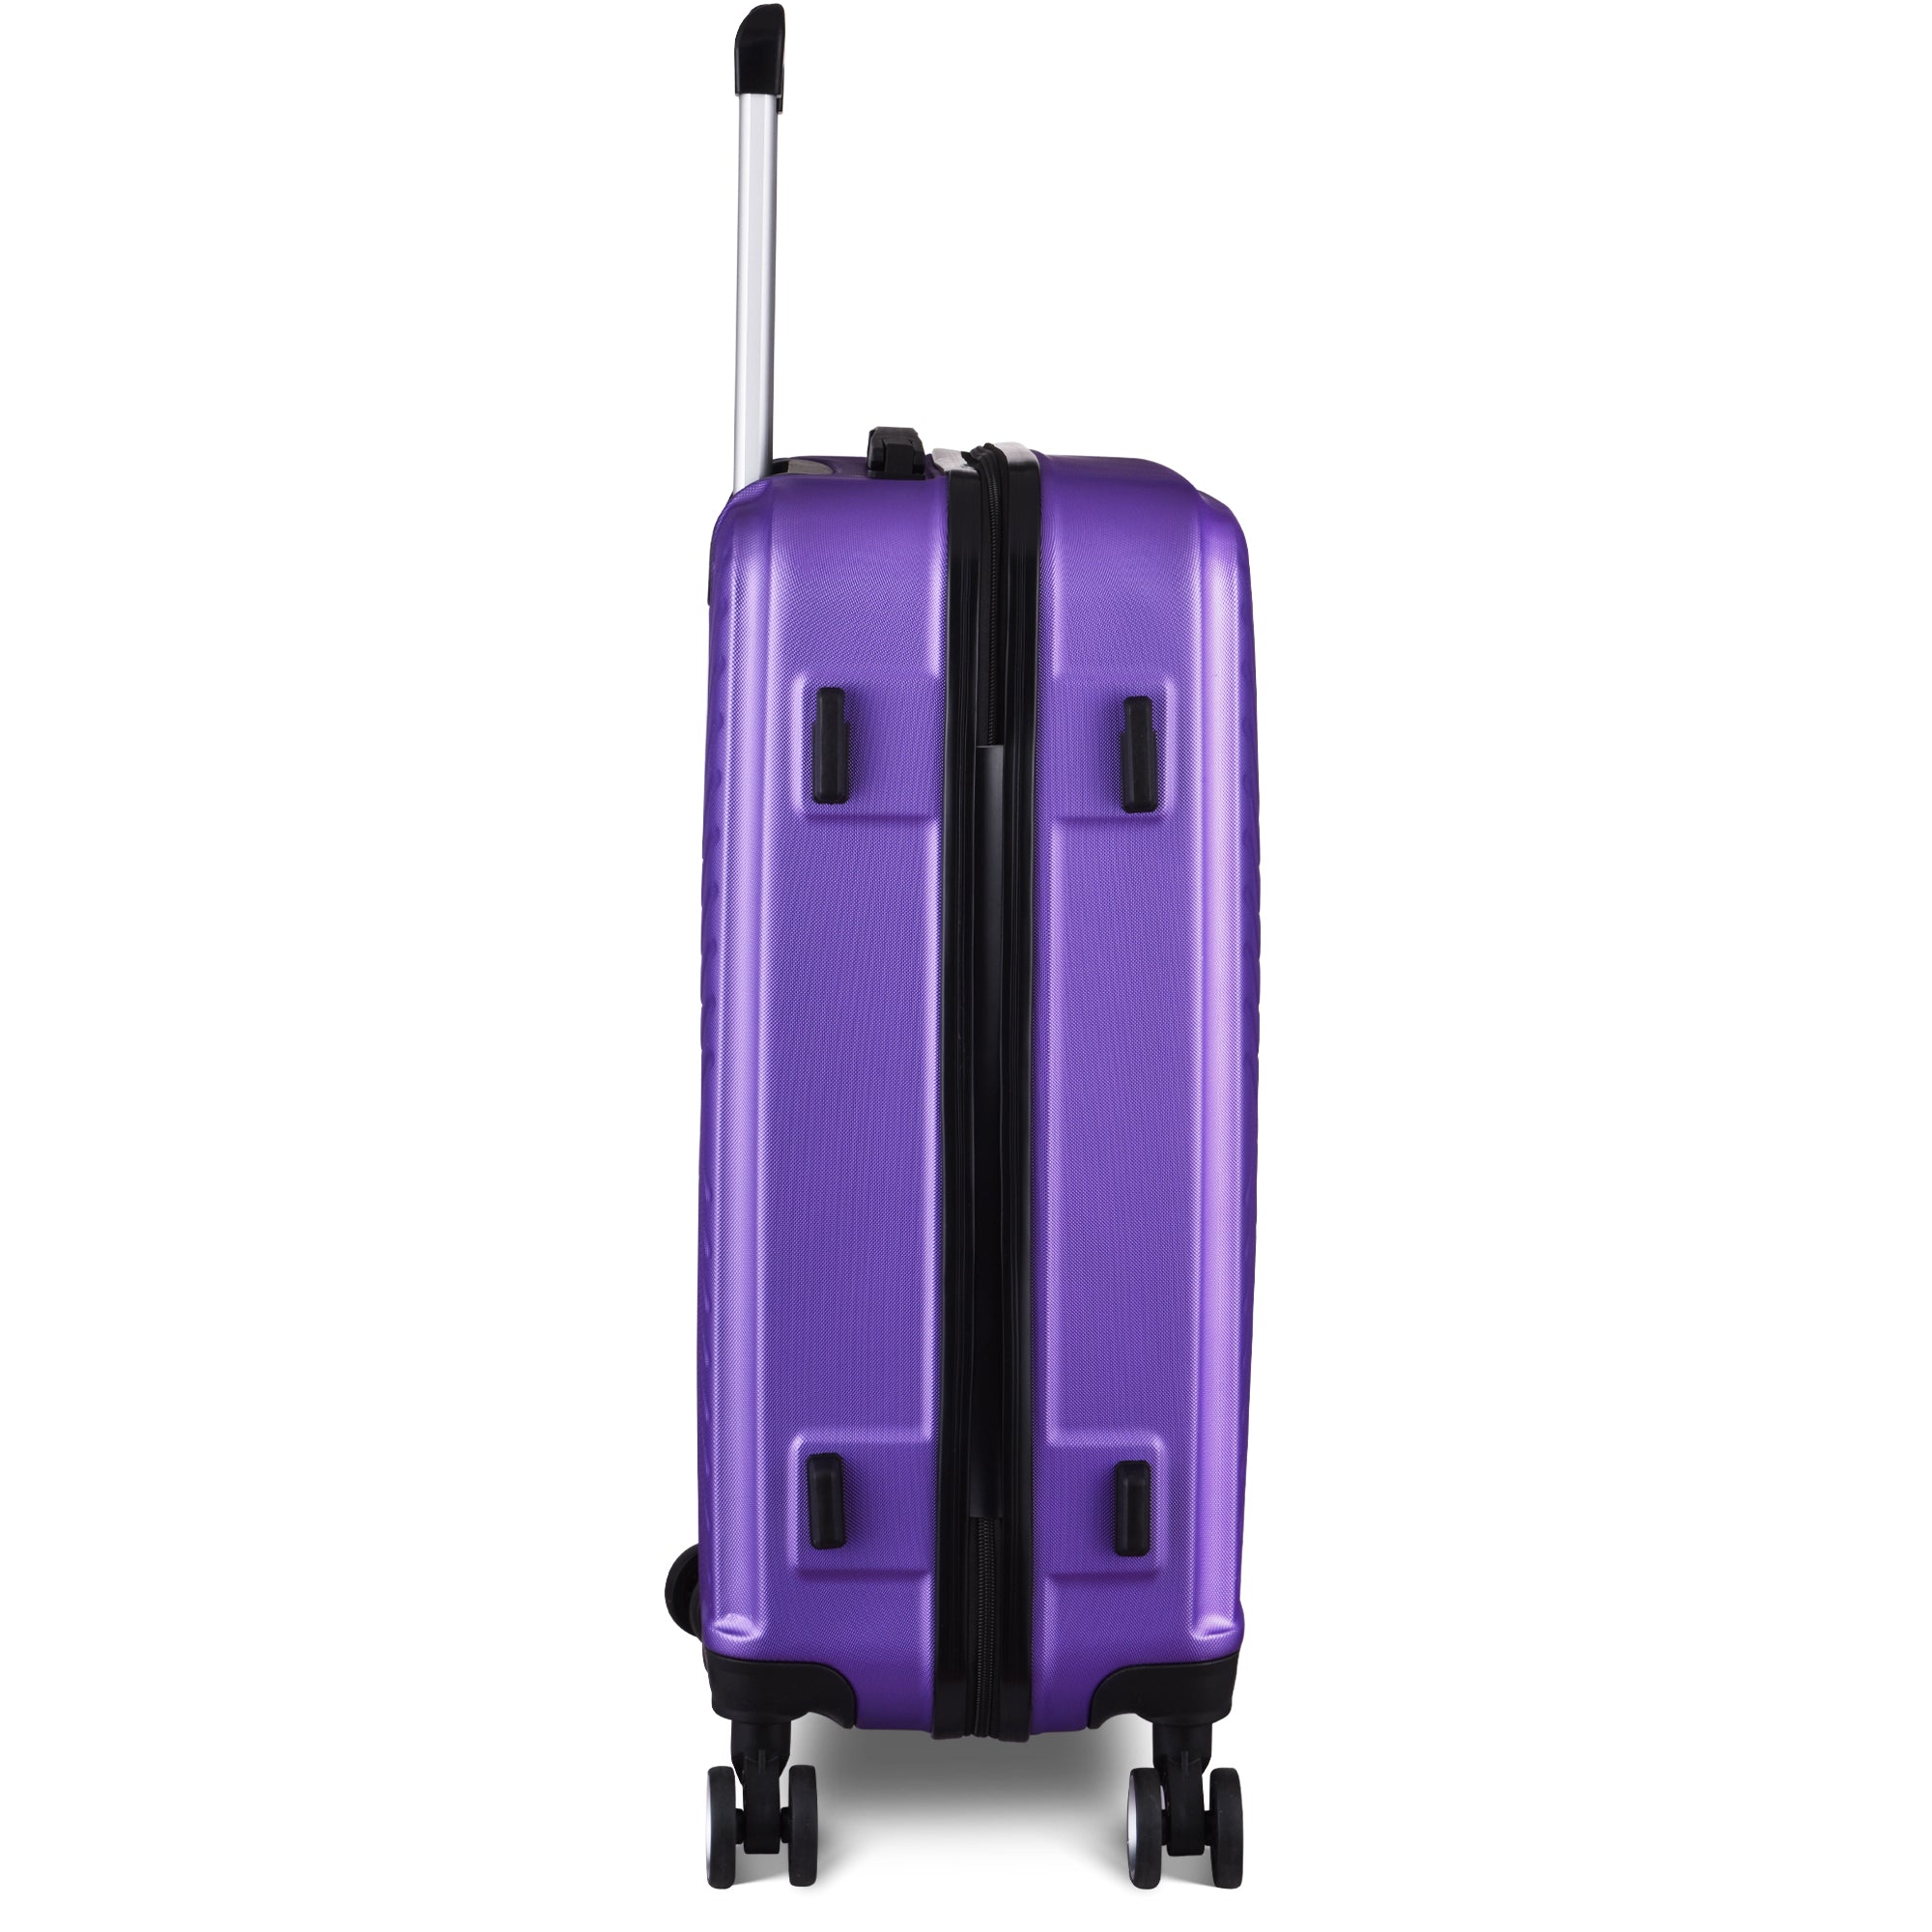 Luggage Sets 3 Piece Suitcase Set Hard Shell Carry on purple-abs